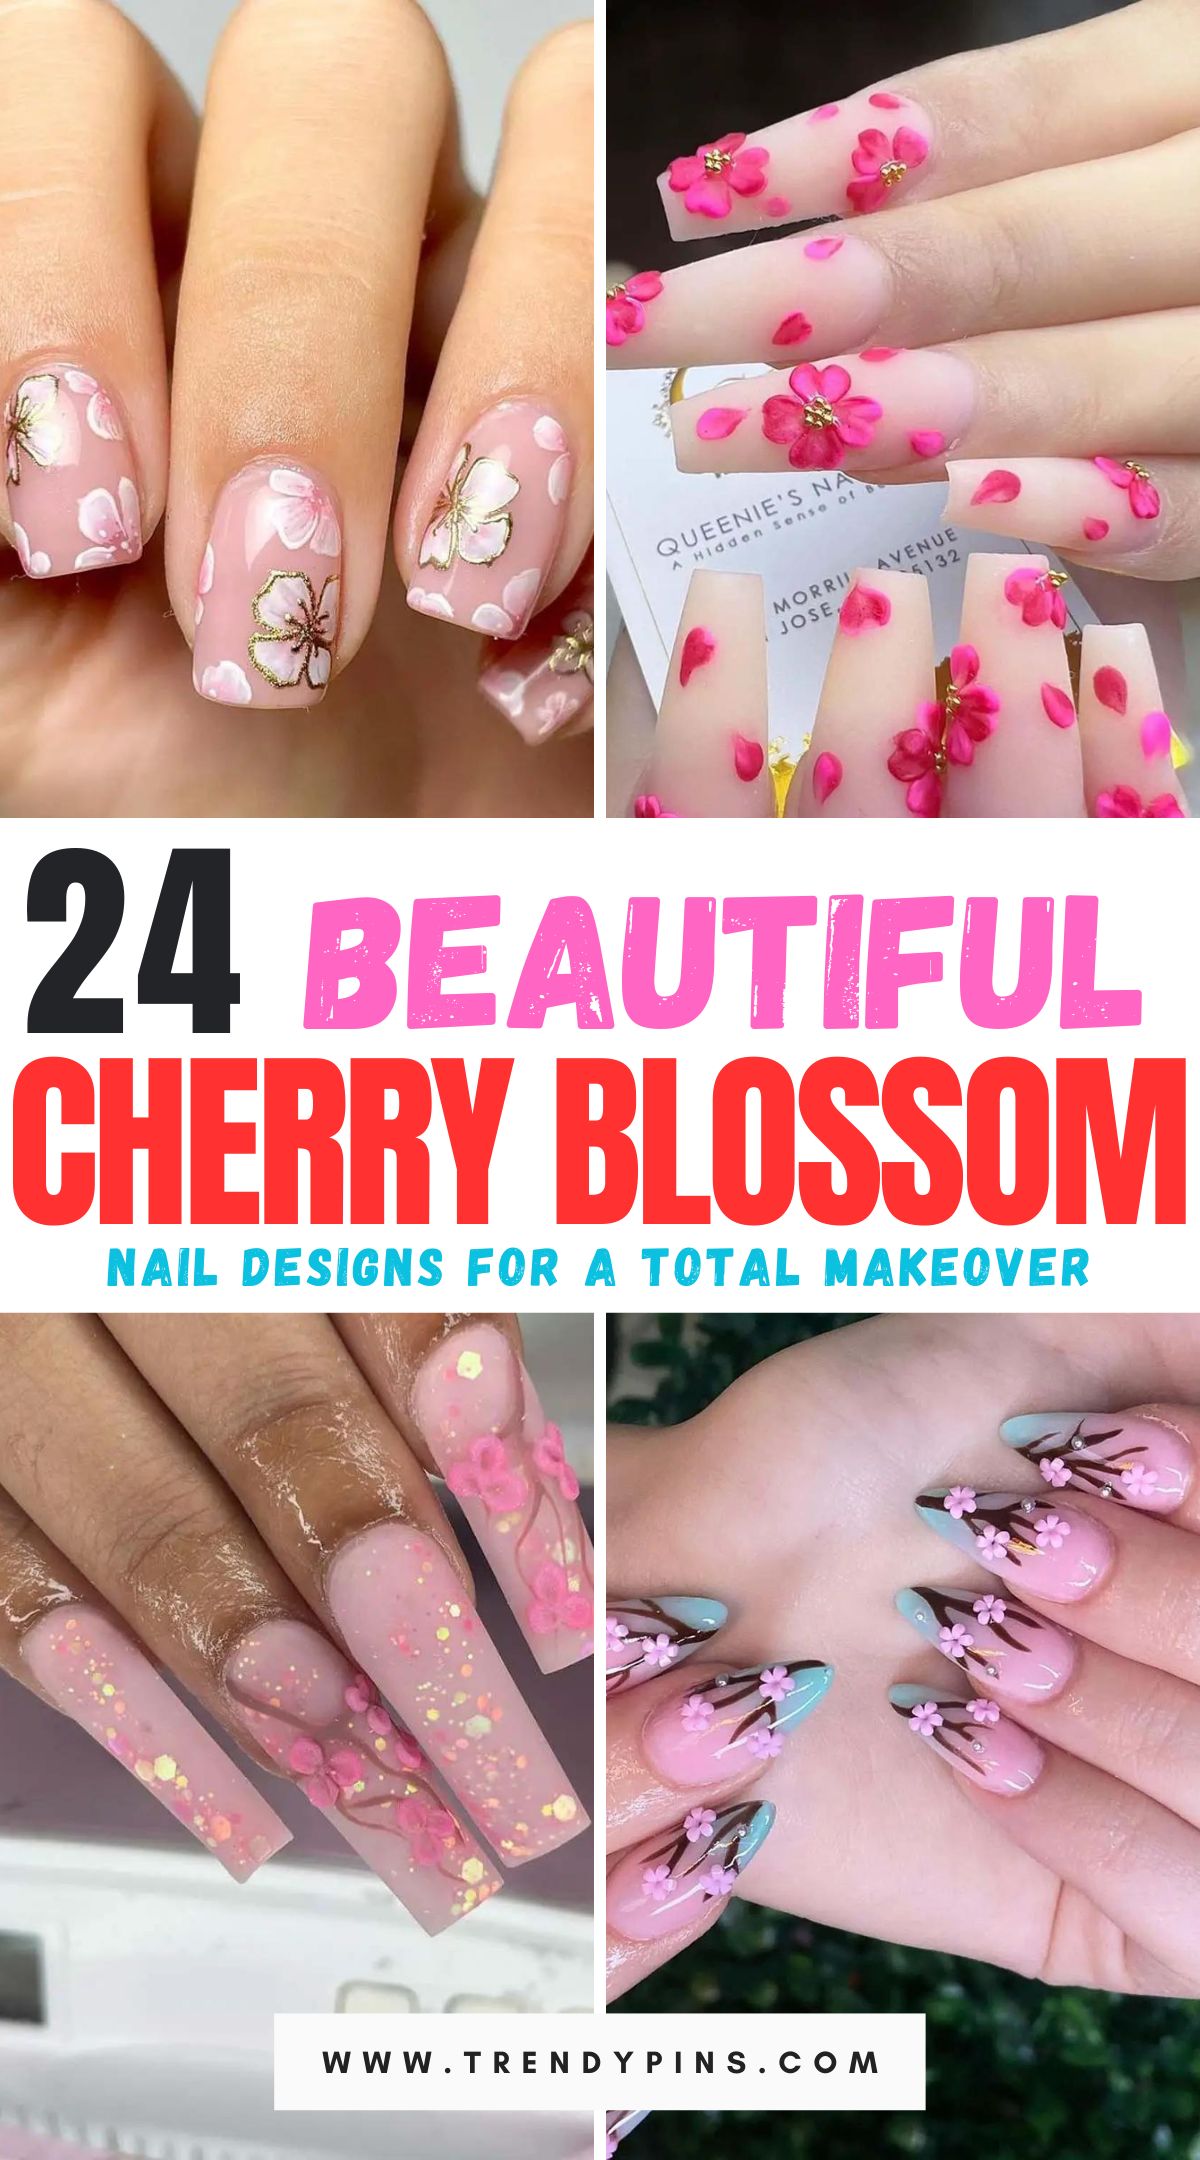 Elevate your nail game with these 24 cherry blossom nail designs, adding a touch of elegance to your look. Embrace the delicate beauty of cherry blossoms and let your nails bloom with creativity and style.